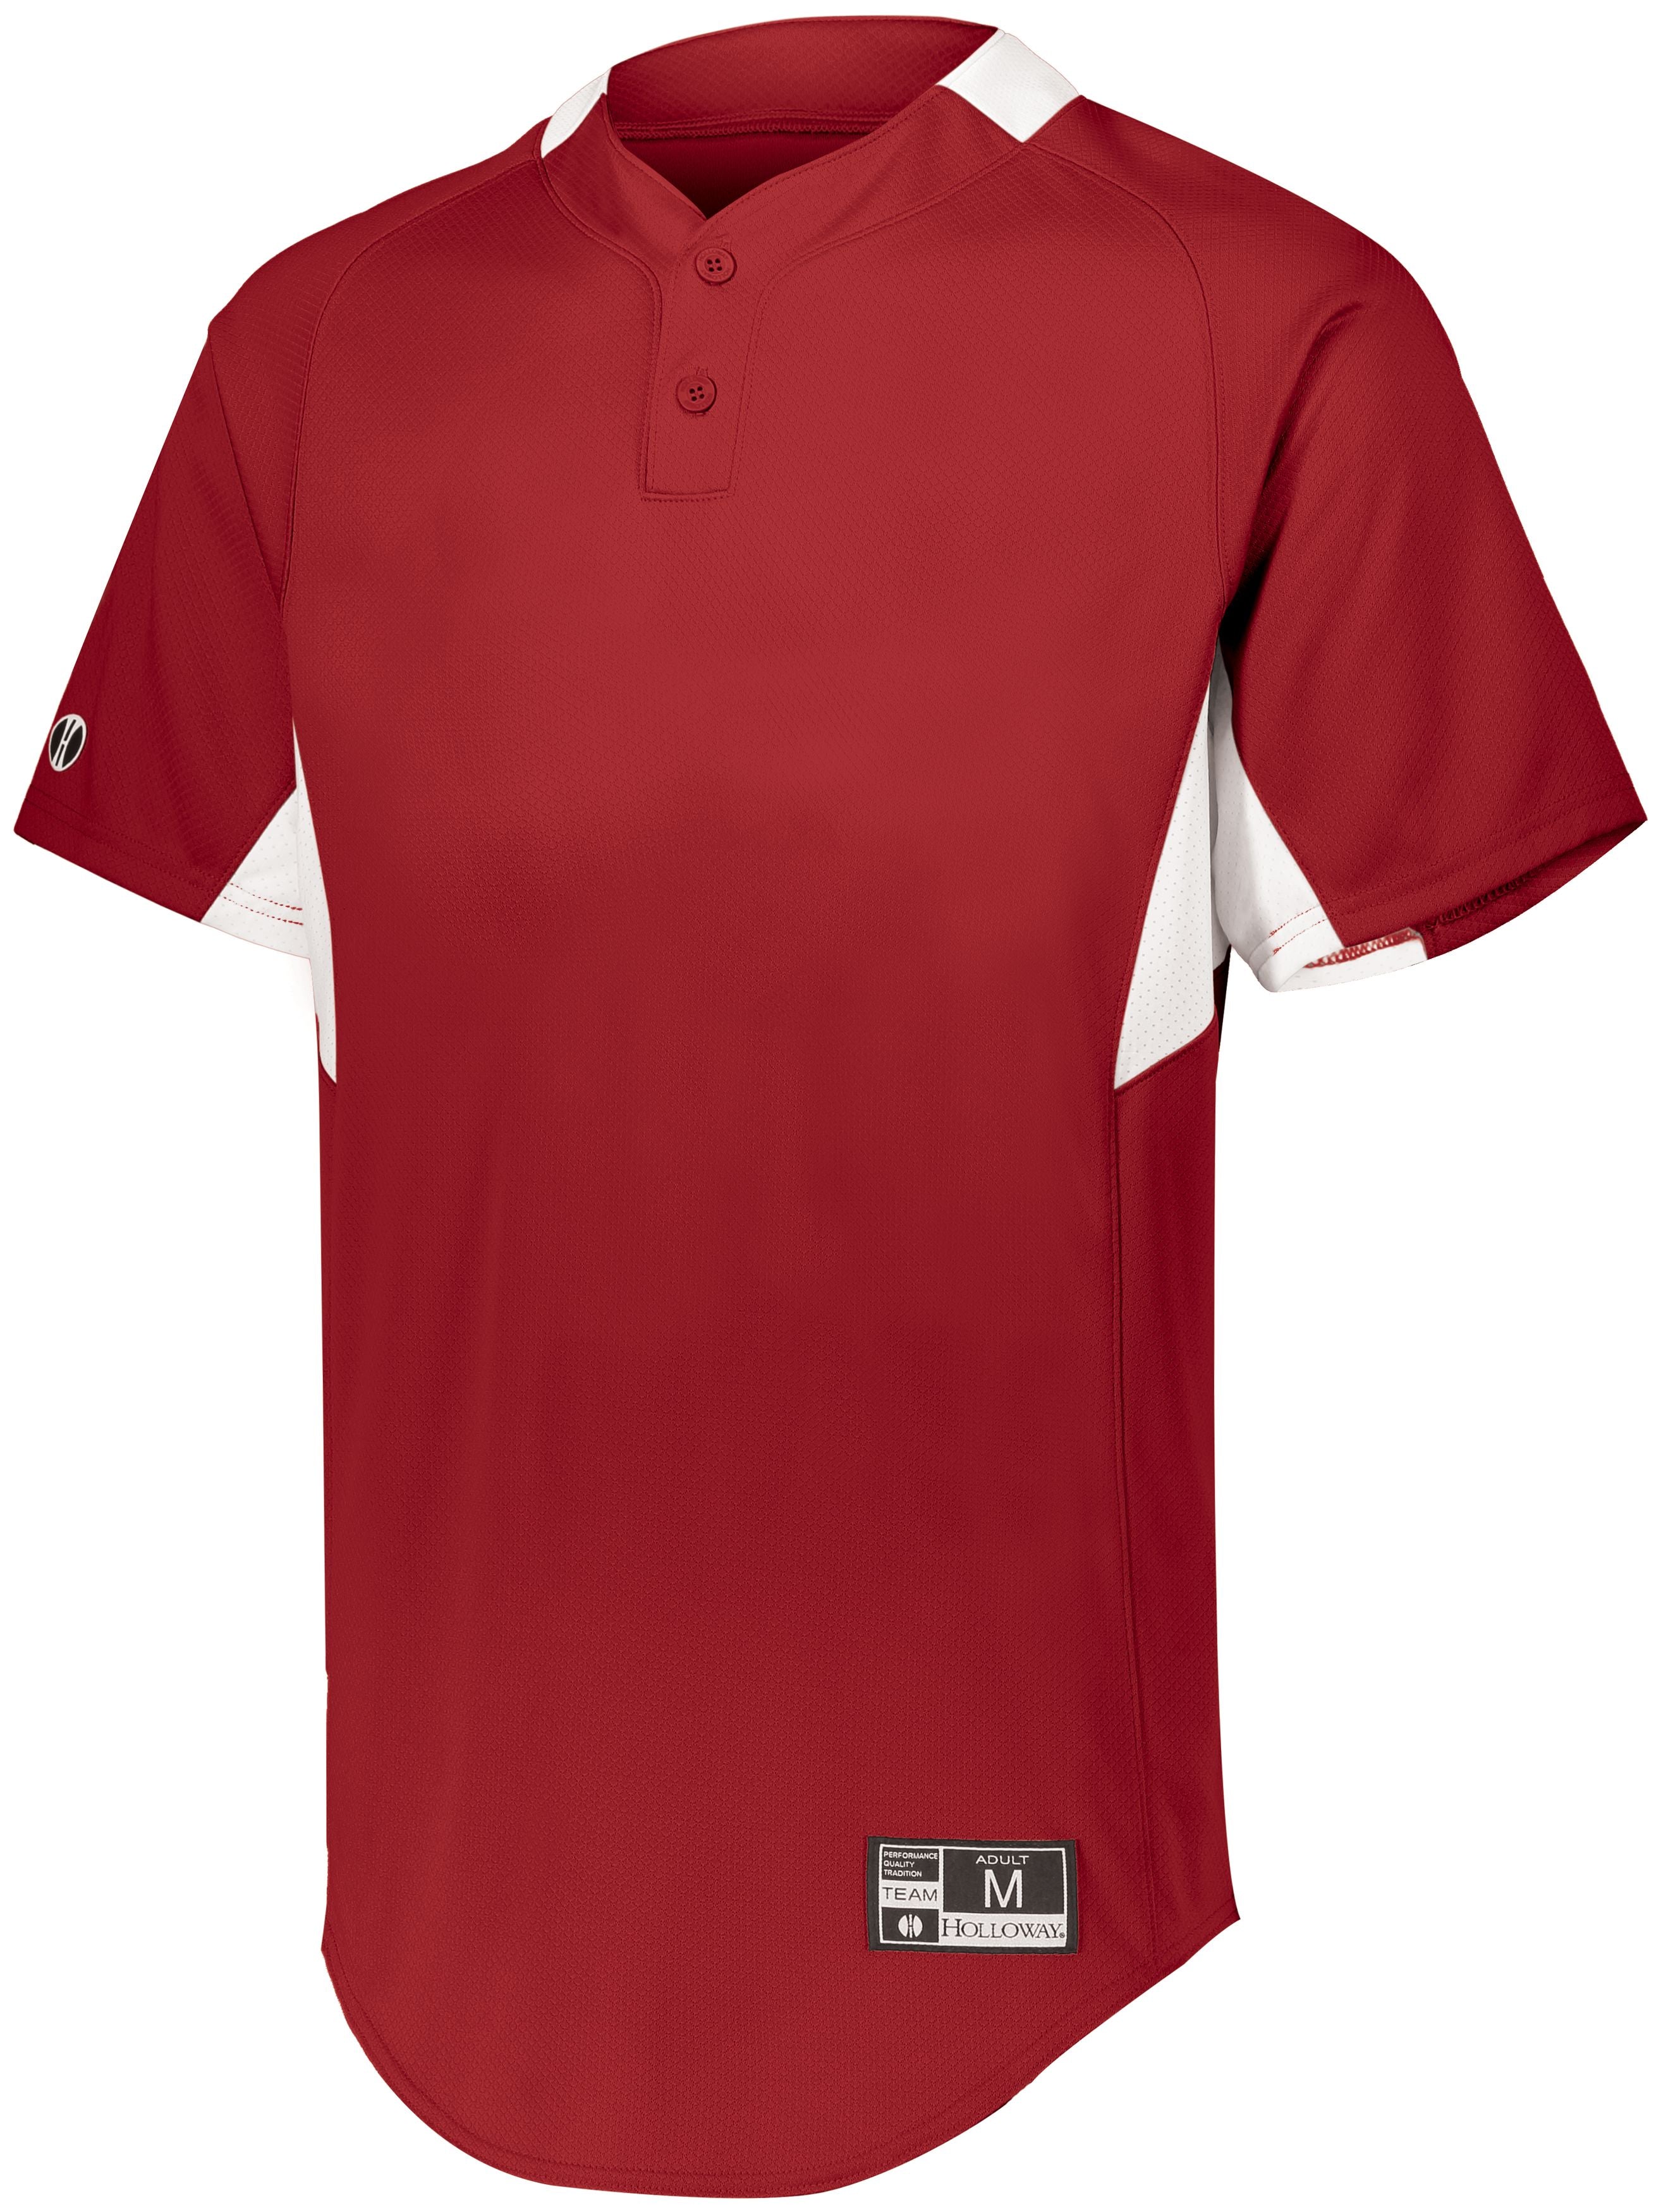 Holloway Youth  Game7 Two-Button Baseball Jersey in Scarlet/White  -Part of the Youth, Youth-Jersey, Baseball, Holloway, Shirts, All-Sports, All-Sports-1 product lines at KanaleyCreations.com